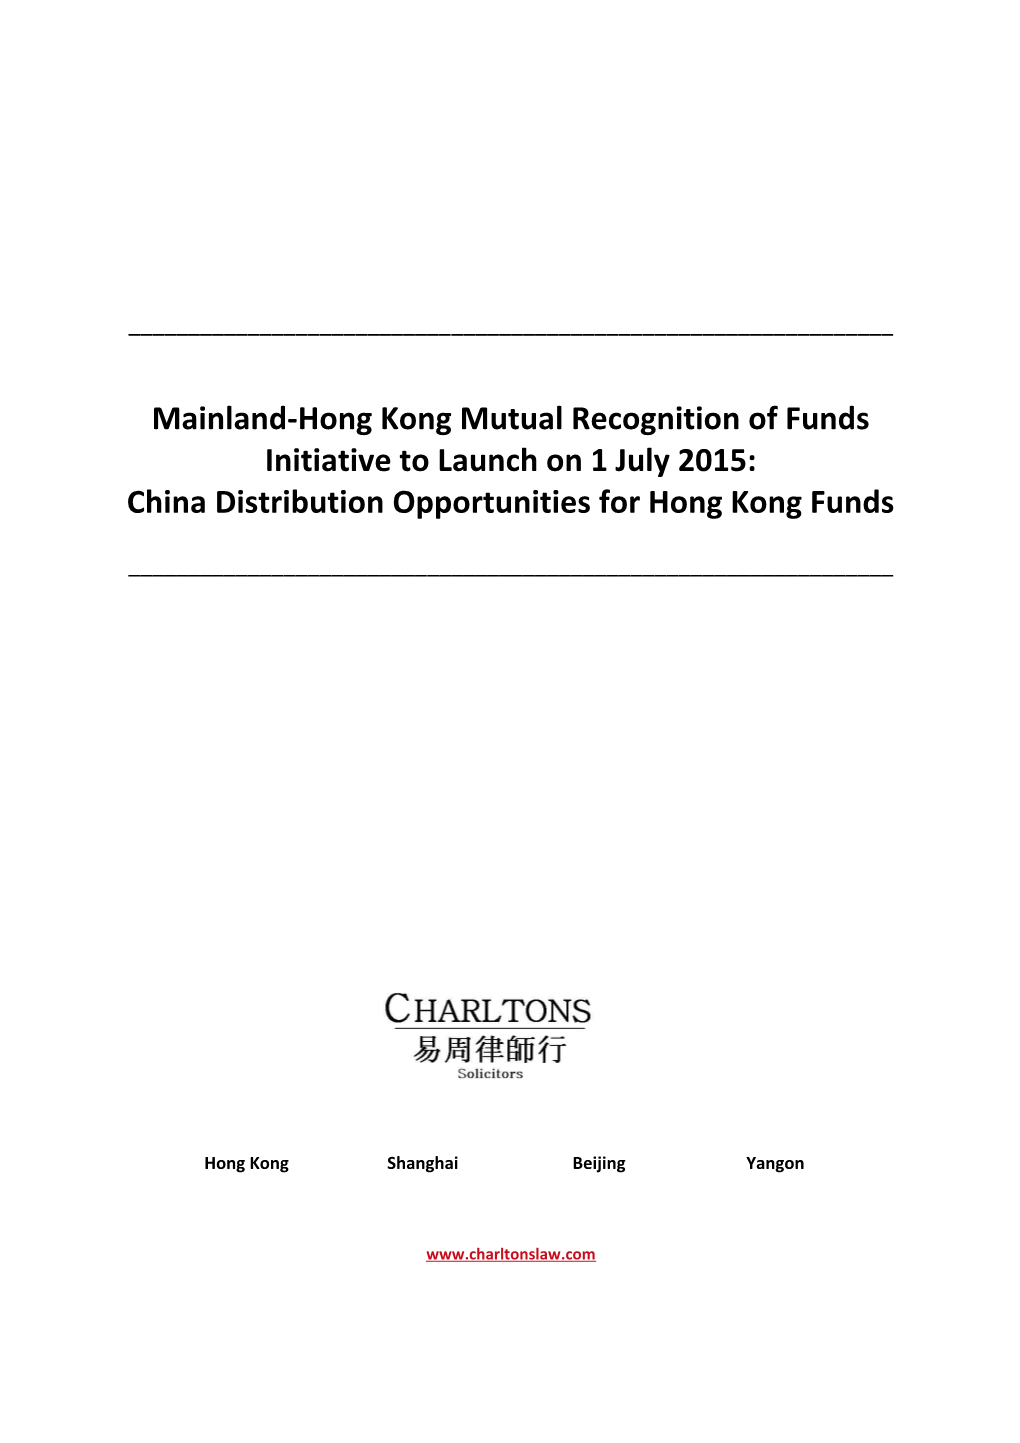 China Distribution Opportunities for Hong Kong Funds